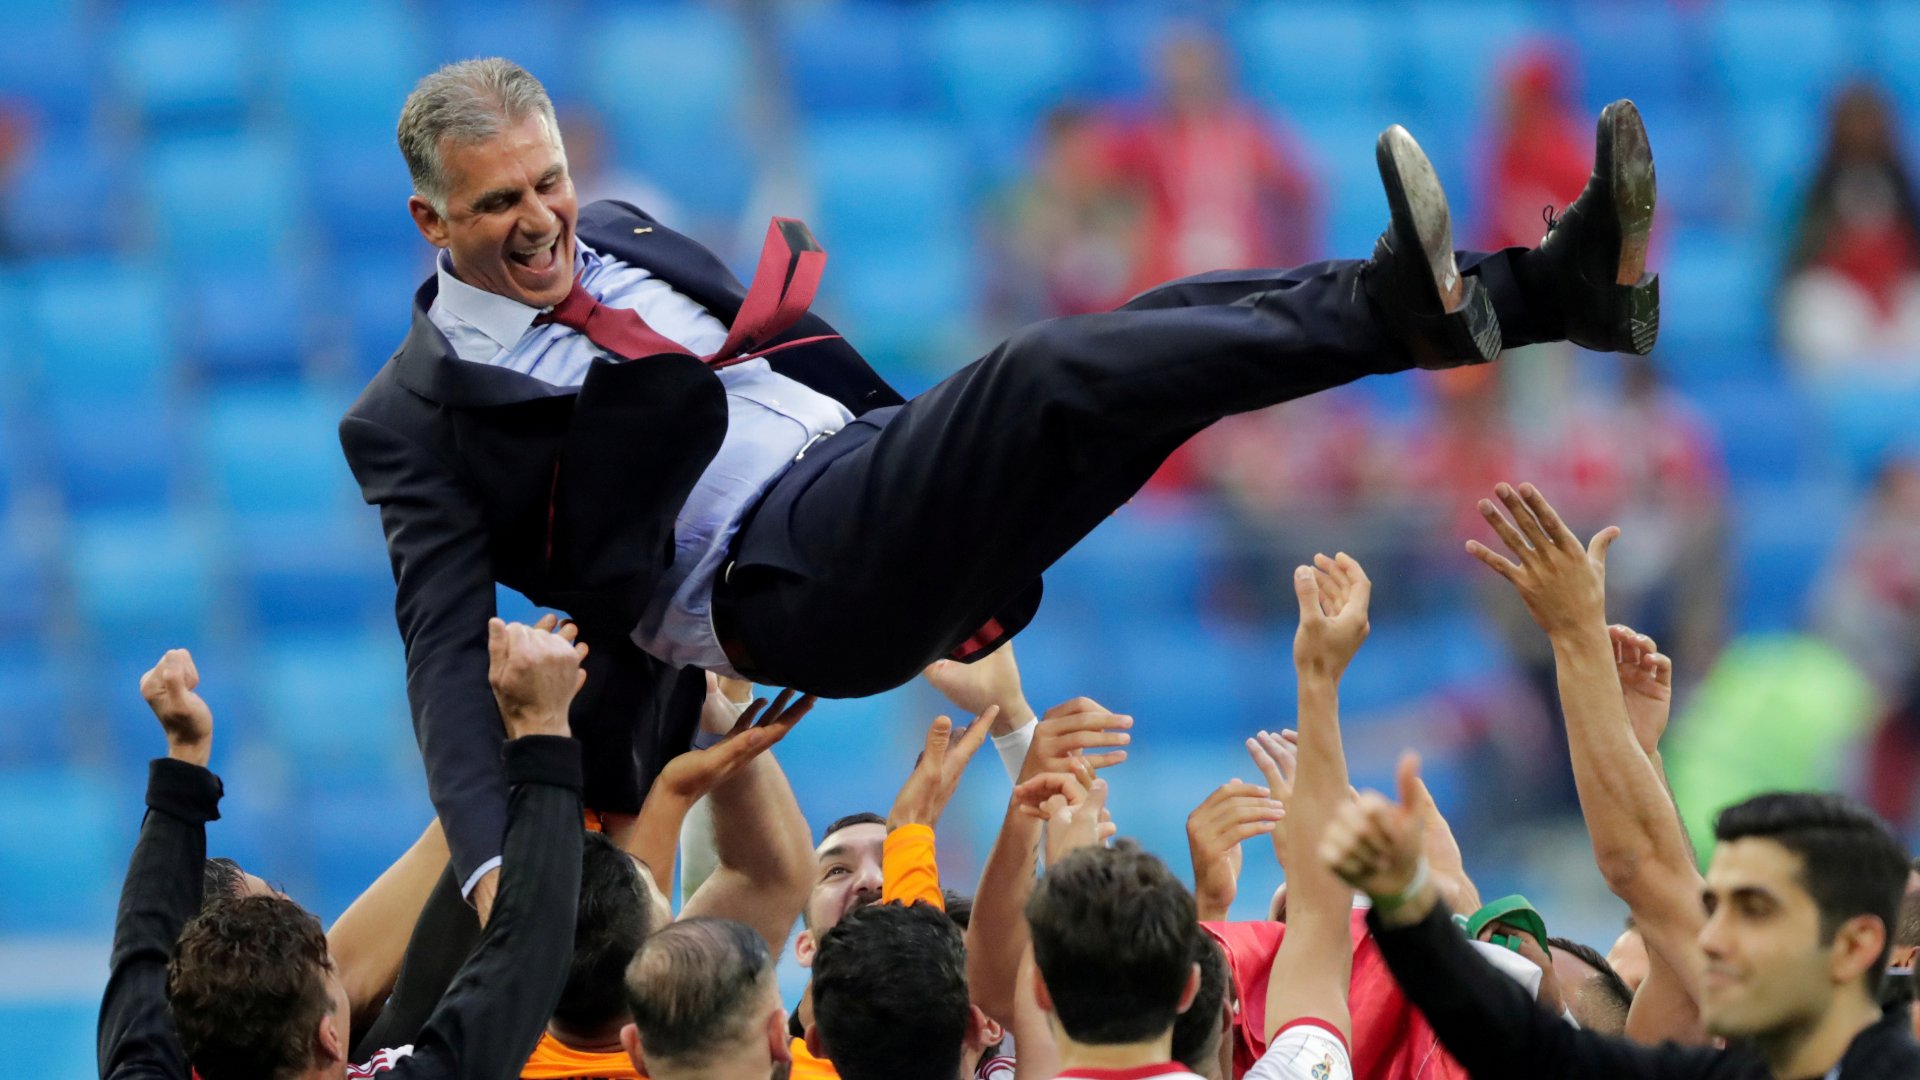 Qatar World Cup 2022: Queiroz tipped for Iran comeback, as US grudge match  looms | Middle East Eye